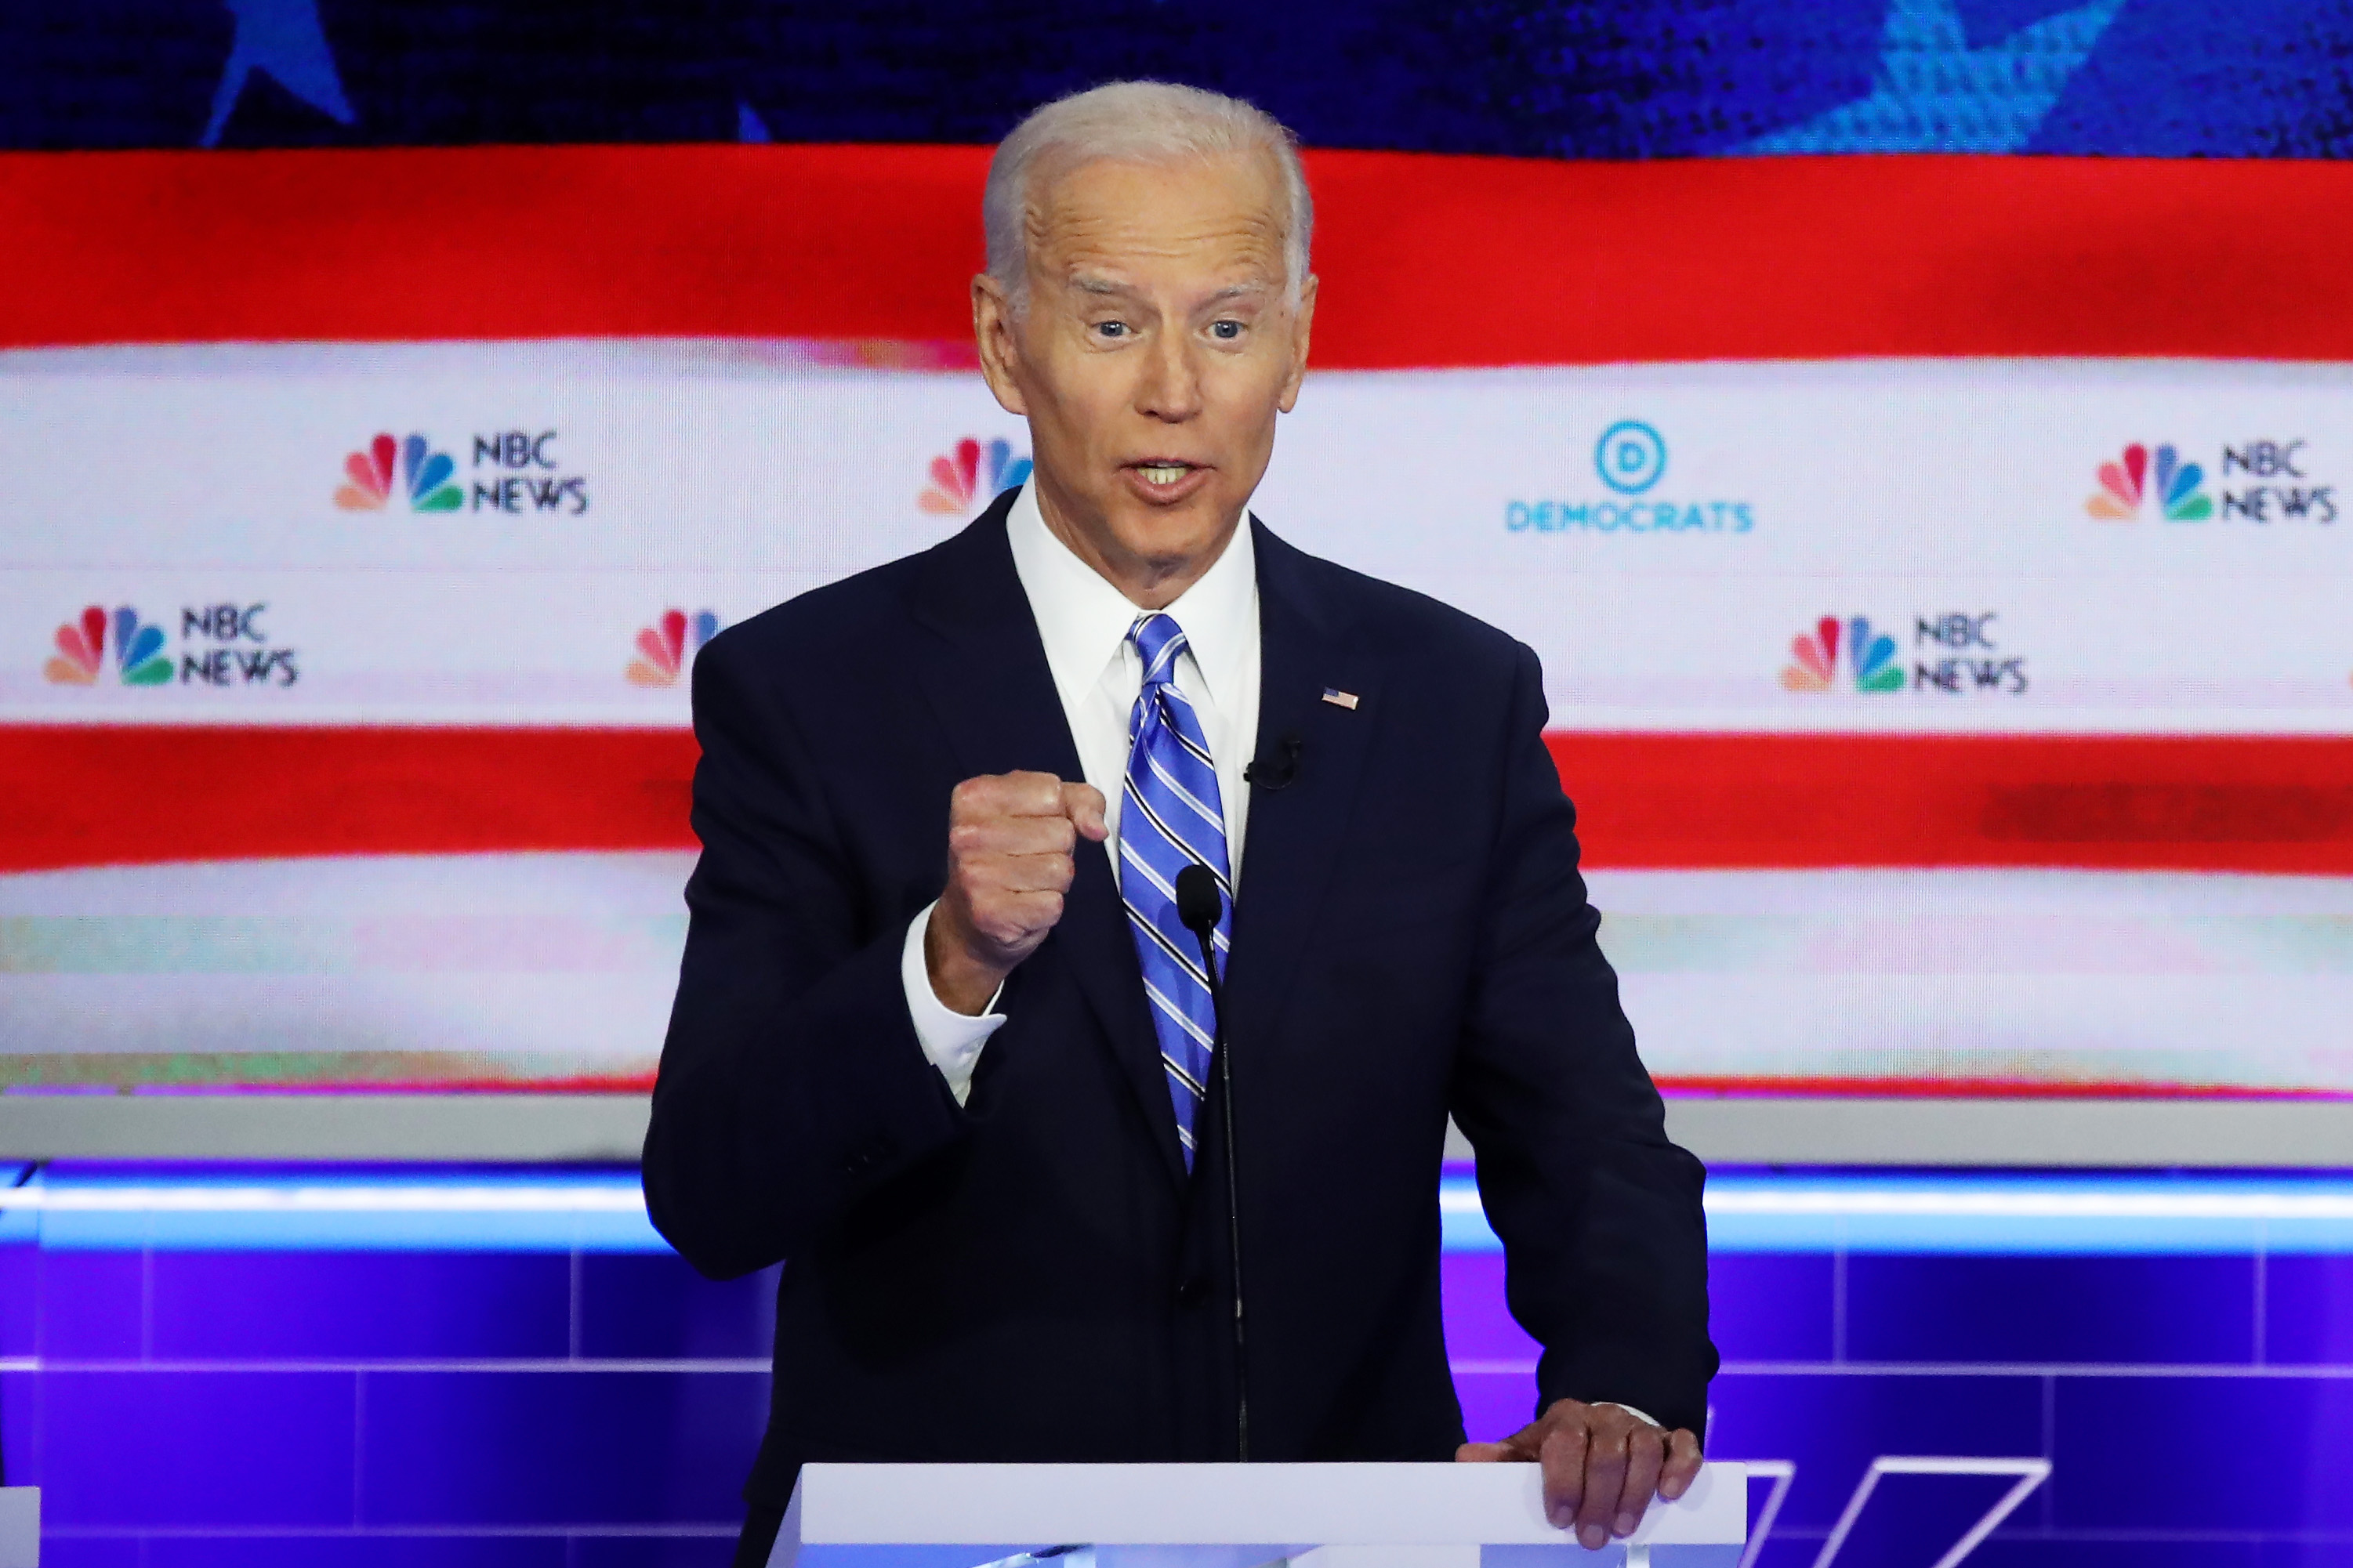 MIAMI, FLORIDA - JUNE 27: Democratic presidential candidate former Vice President Joe Biden speaks during the second night of the first Democratic presidential debate on June 27, 2019 in Miami, Florida. A field of 20 Democratic presidential candidates was split into two groups of 10 for the first debate of the 2020 election, taking place over two nights at Knight Concert Hall of the Adrienne Arsht Center for the Performing Arts of Miami-Dade County, hosted by NBC News, MSNBC, and Telemundo. (Photo by Drew Angerer/Getty Images)